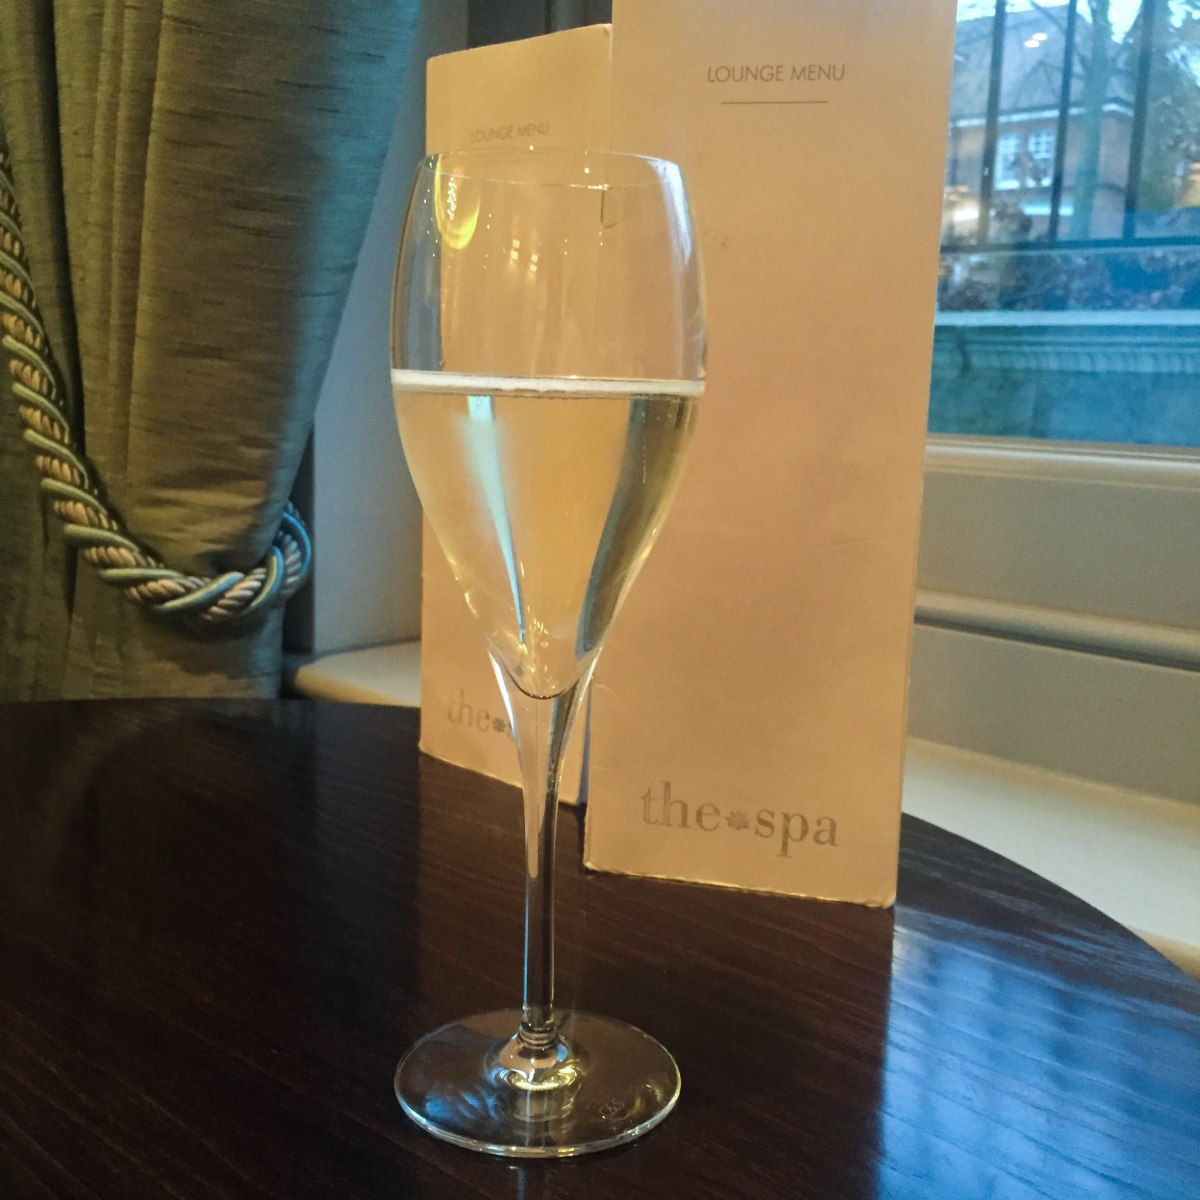 A photograph of a glass of Prosecco that Emma had while waiting for her husband